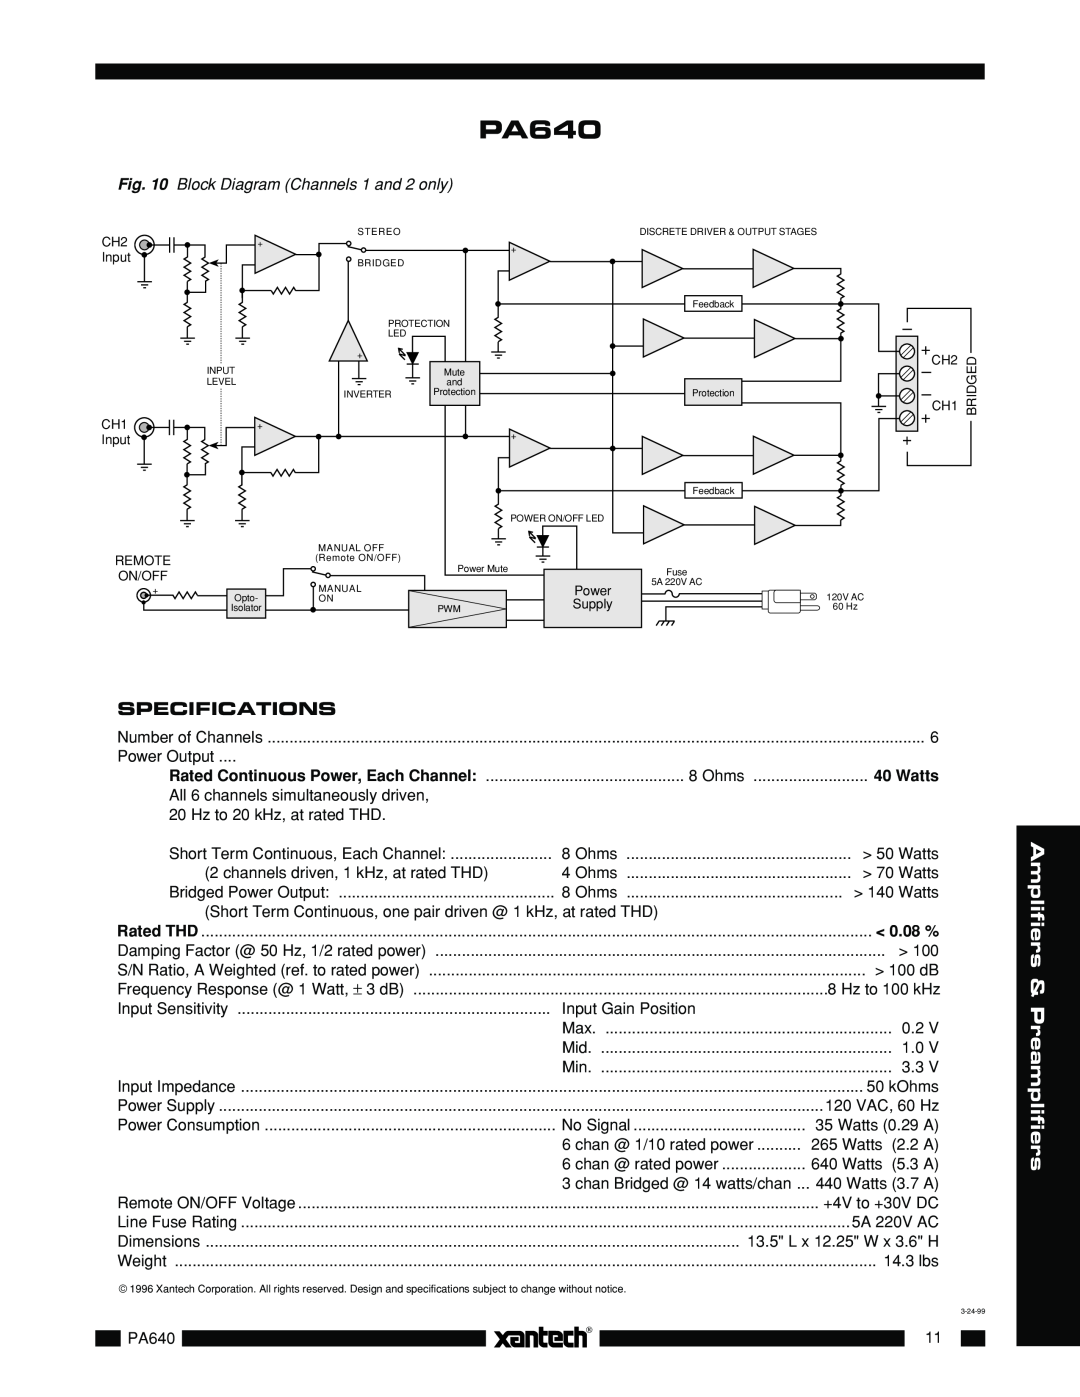 Xantech PA640 Amplifiers & Preamplifiers, Specifications, Block Diagram Channels 1 and 2 only, Watts, 0.08 % 